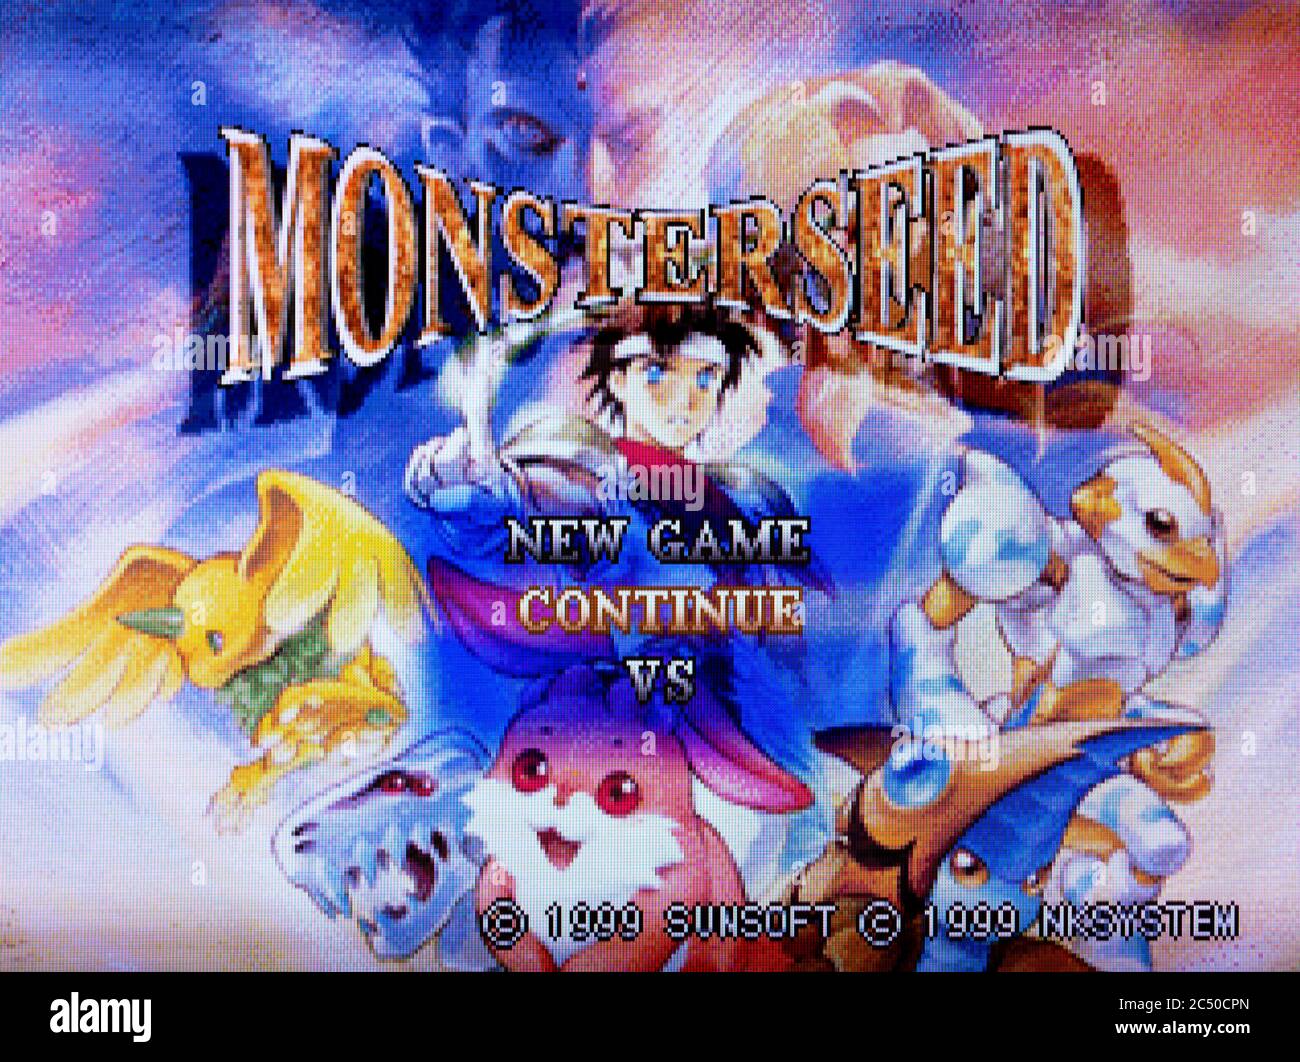 Monsterseed - Sony PlayStation 1 PS1 PSX - usage éditorial uniquement Banque D'Images